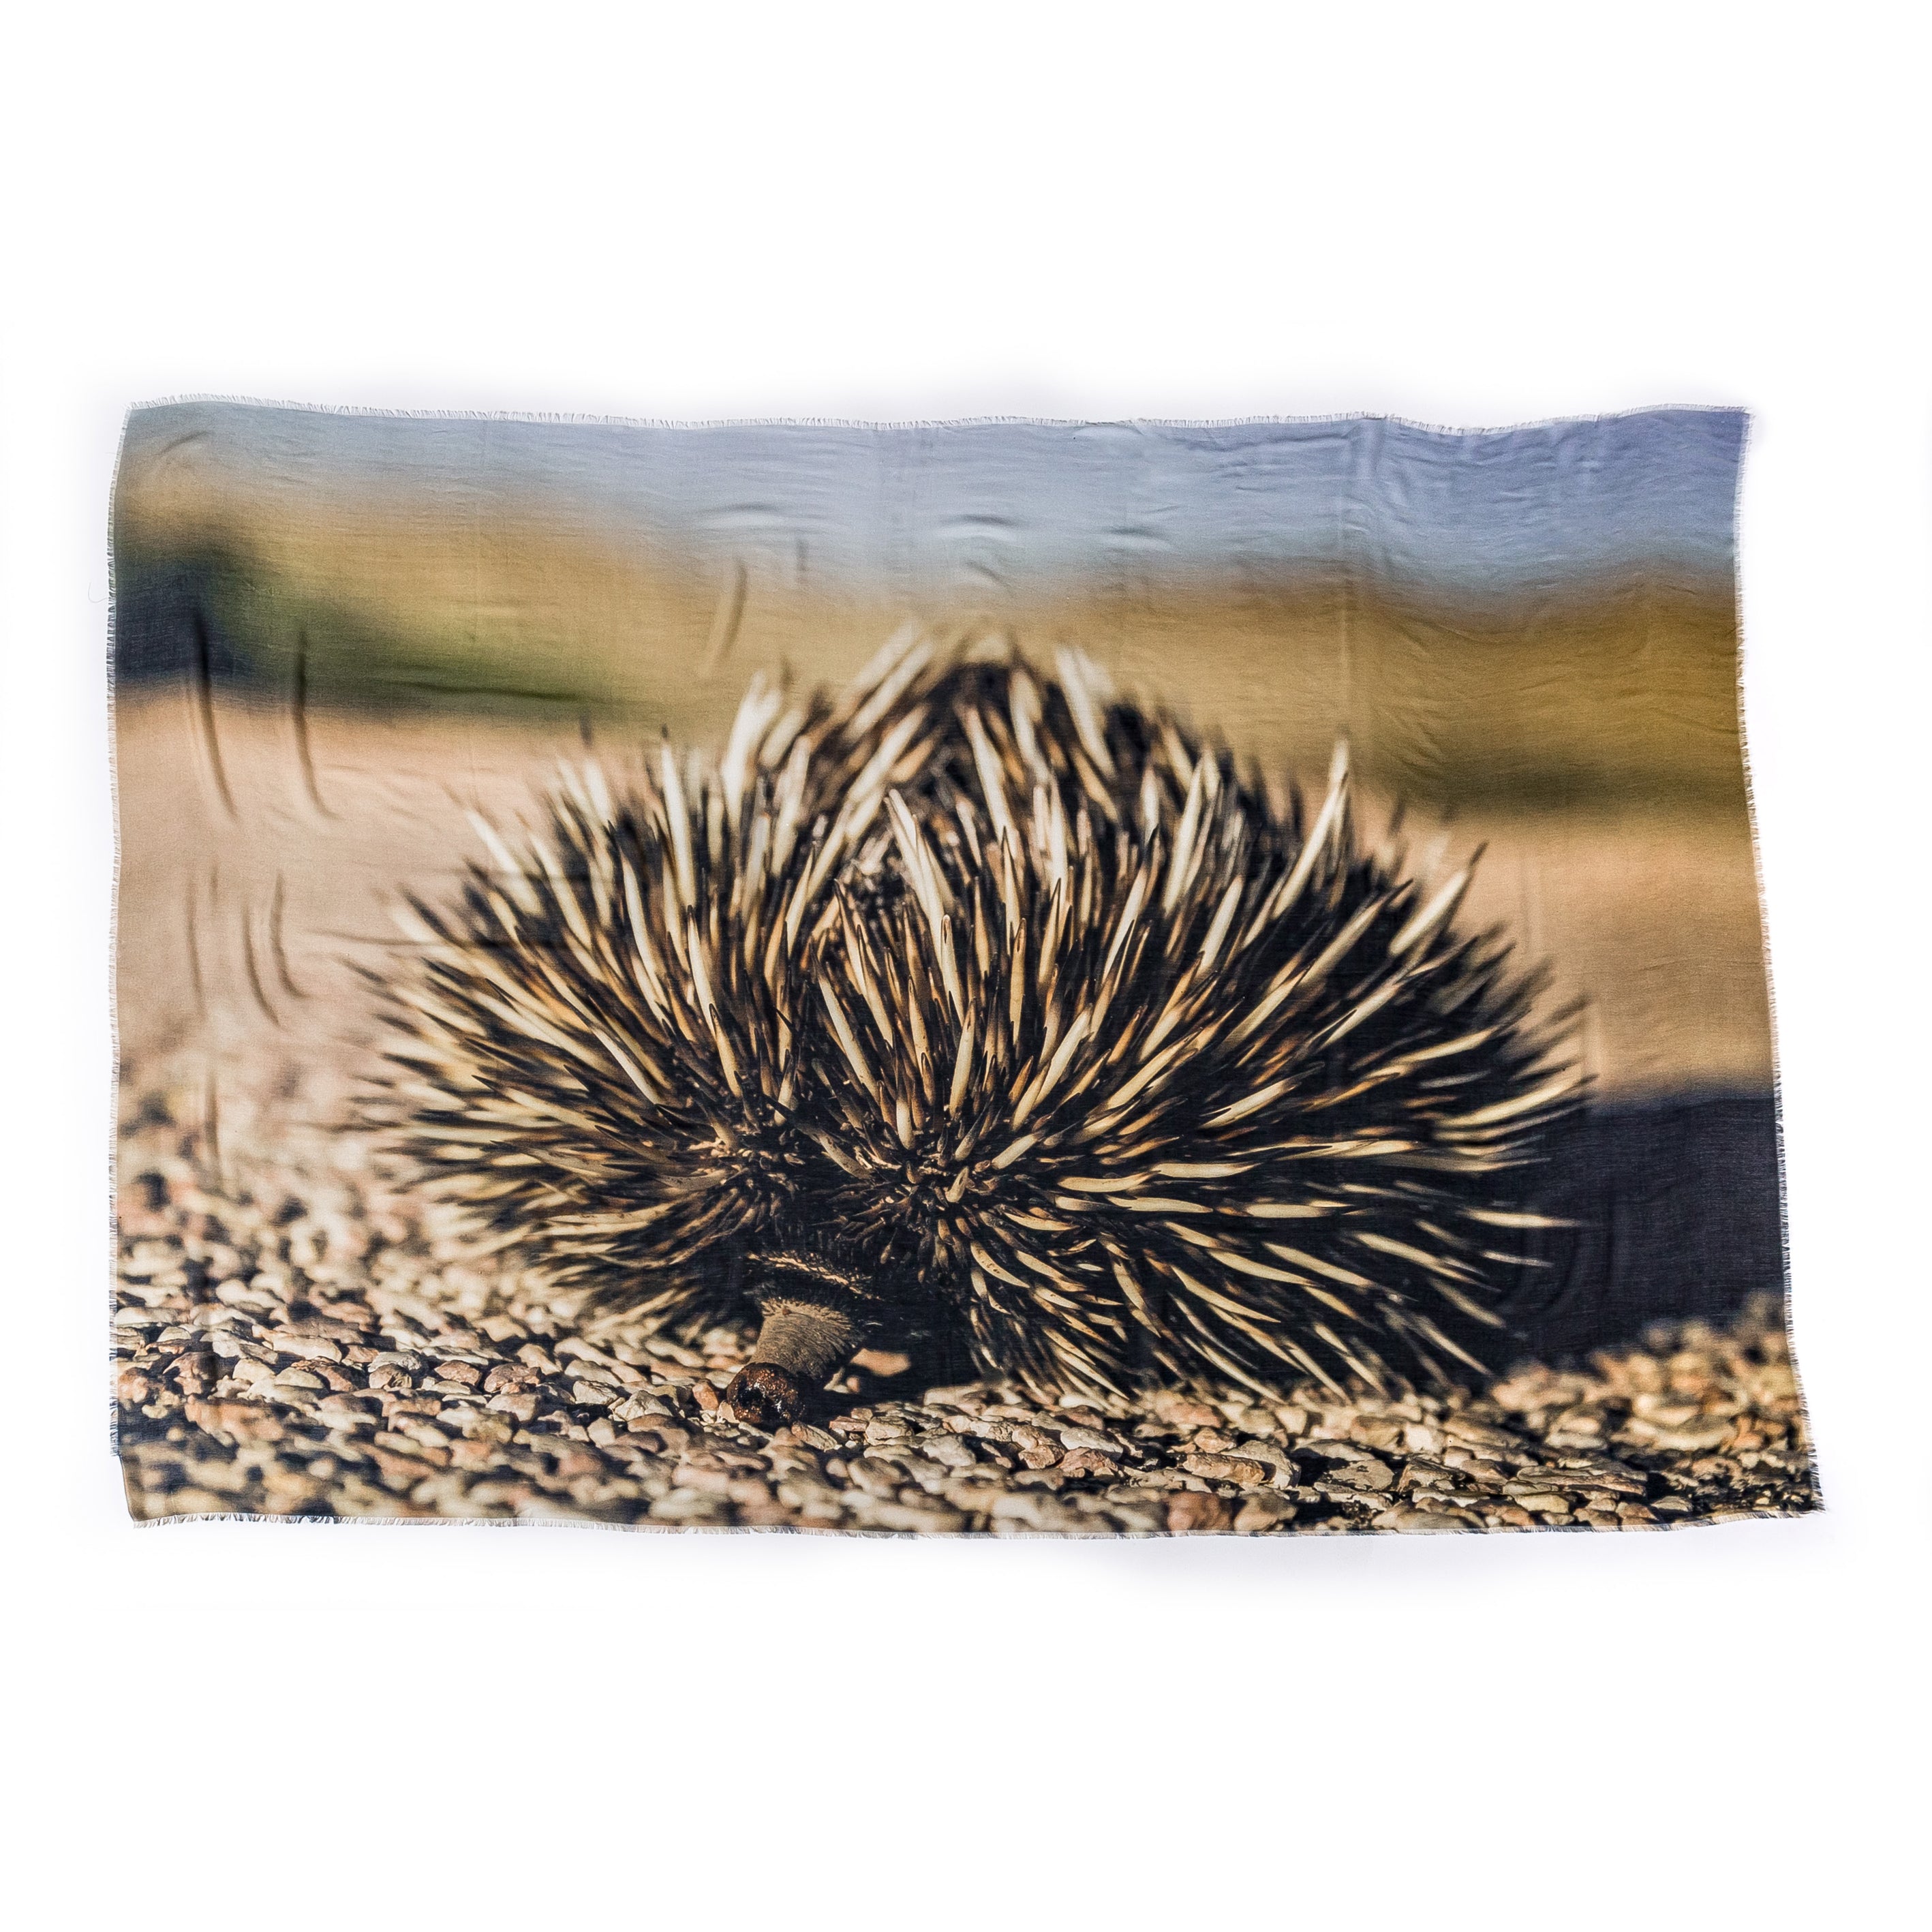 Wanderer Scarf (Echidna)  //  SOLD OUT